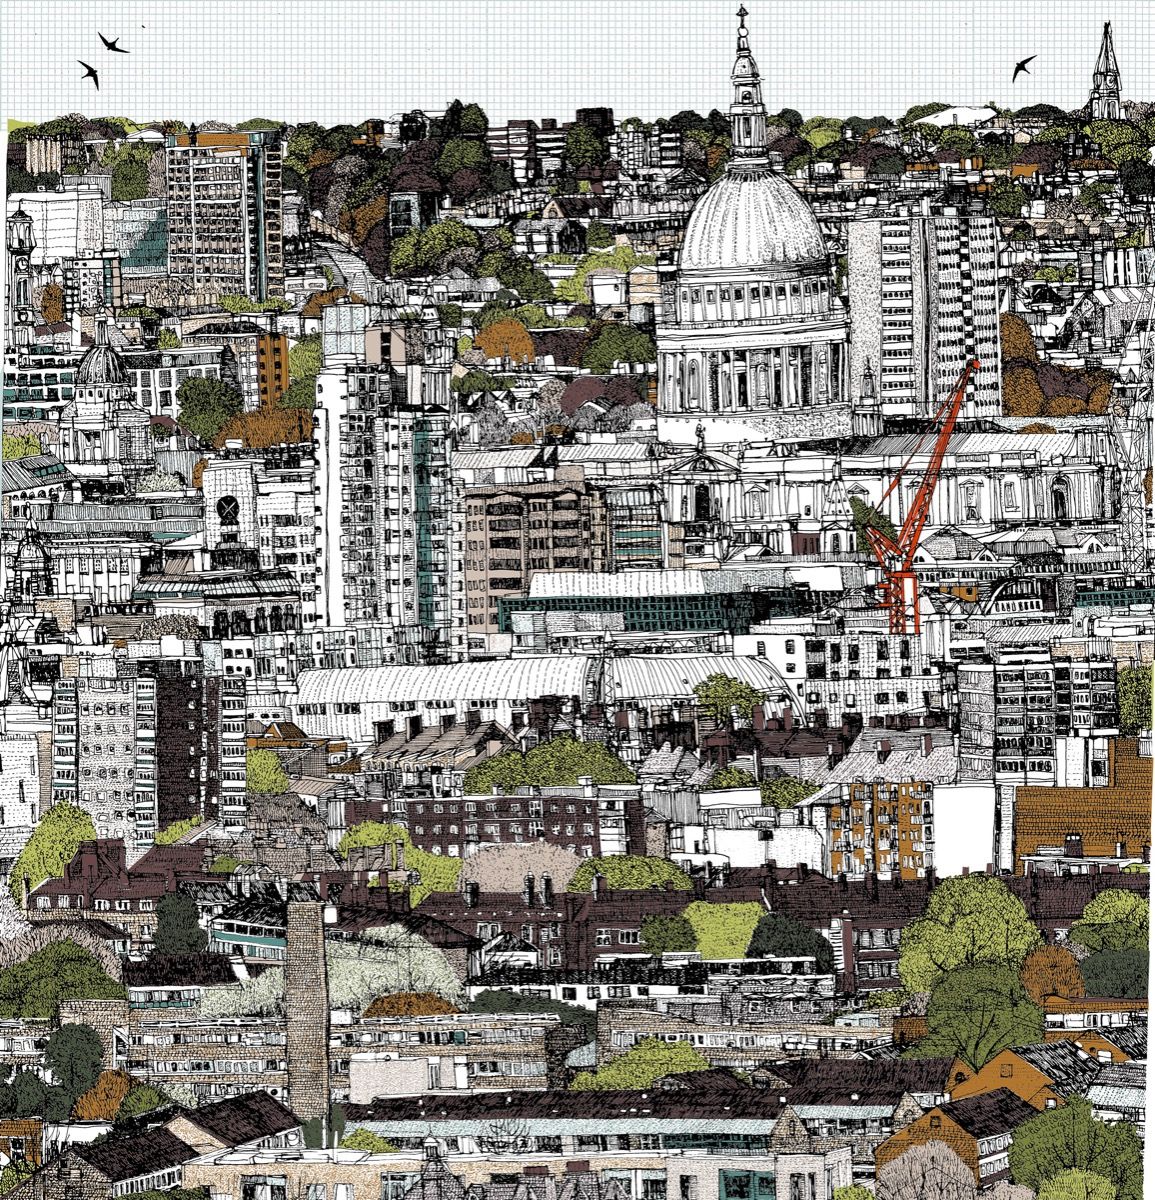 Changing Seasons at St Pauls by Clare Halifax